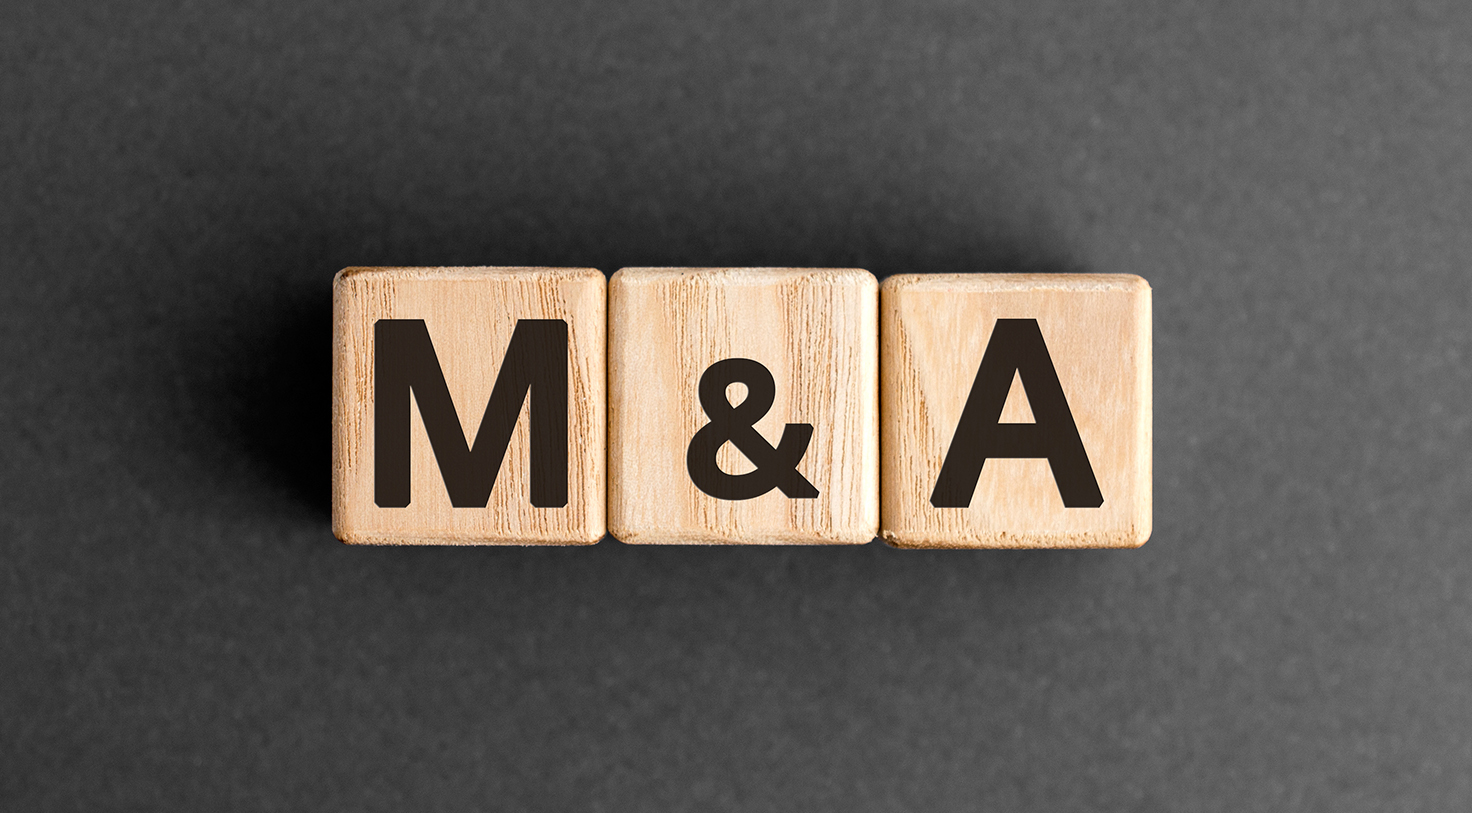 M&A - acronym from wooden blocks with letters, mergers and acquisitions M&A concept,  top view on grey background